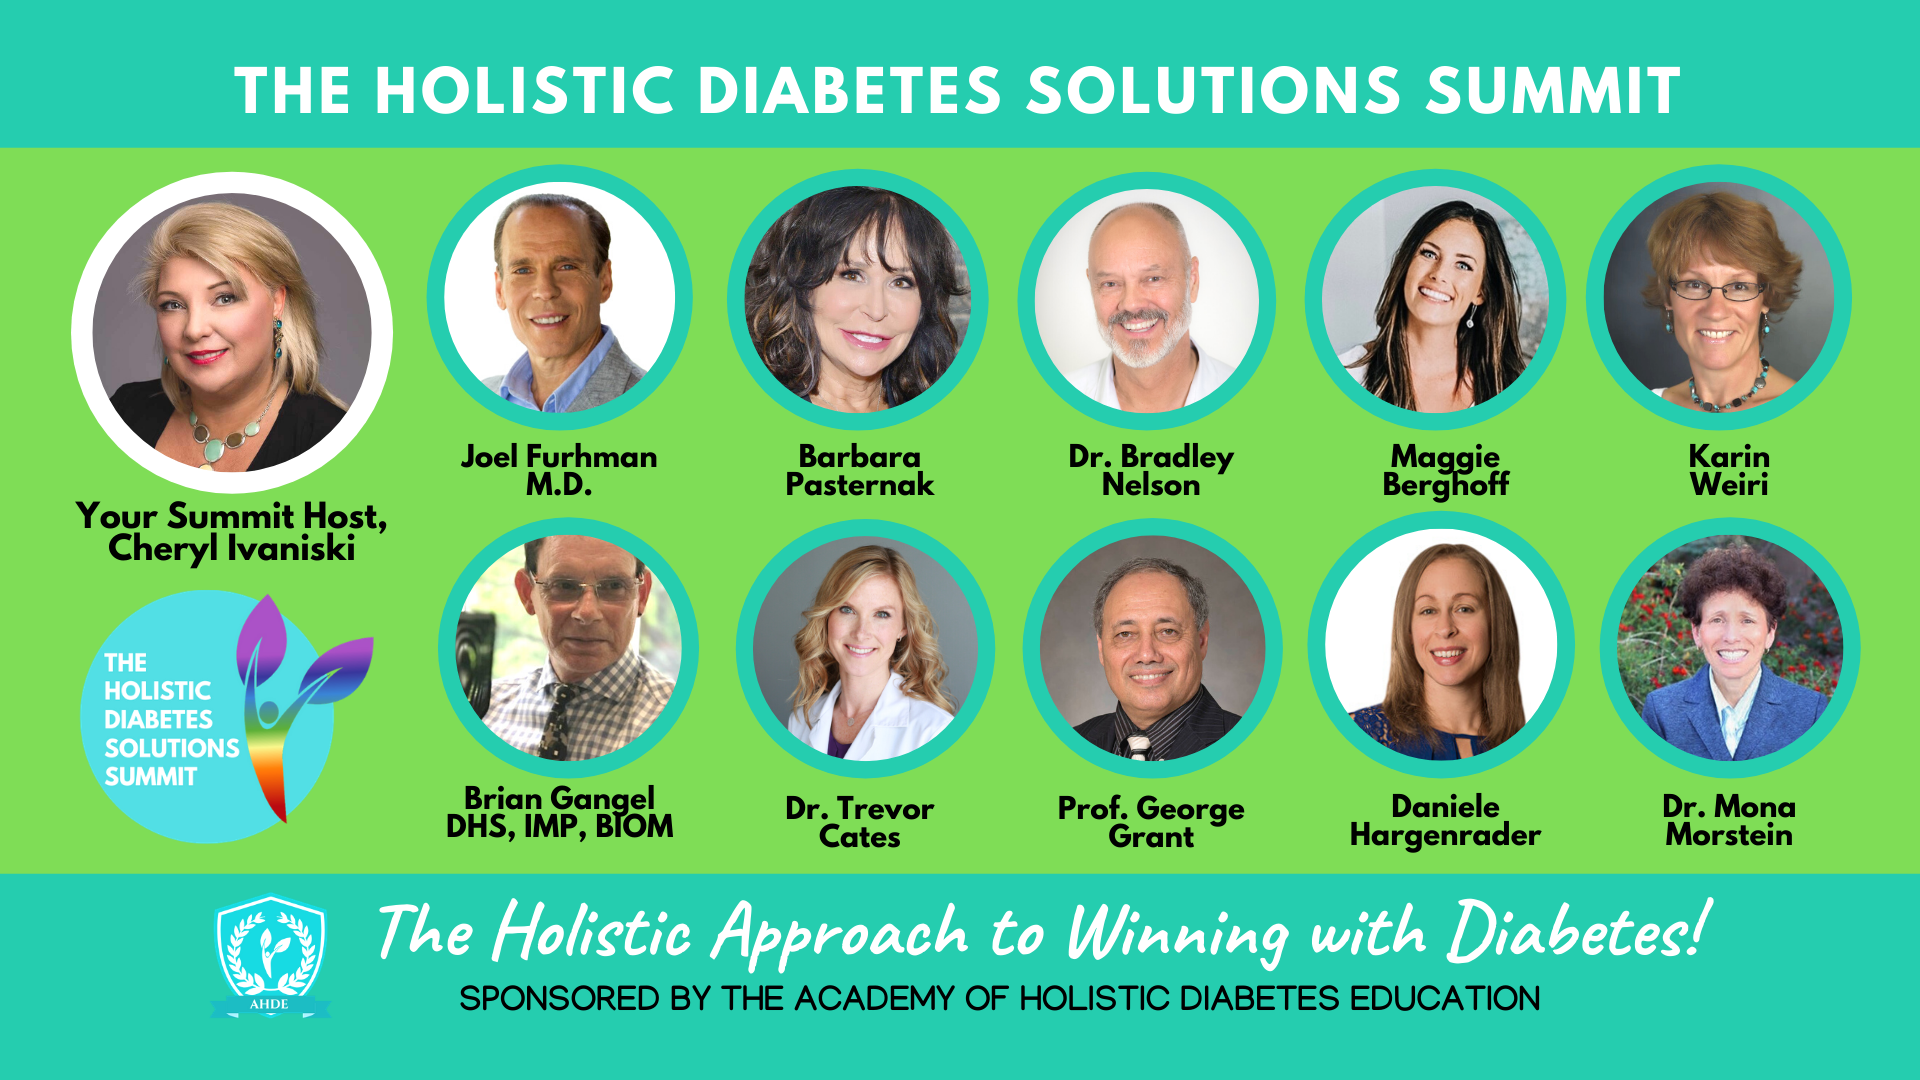 You’re invited to the FIRST-EVER Holistic Diabetes Solutions Summit